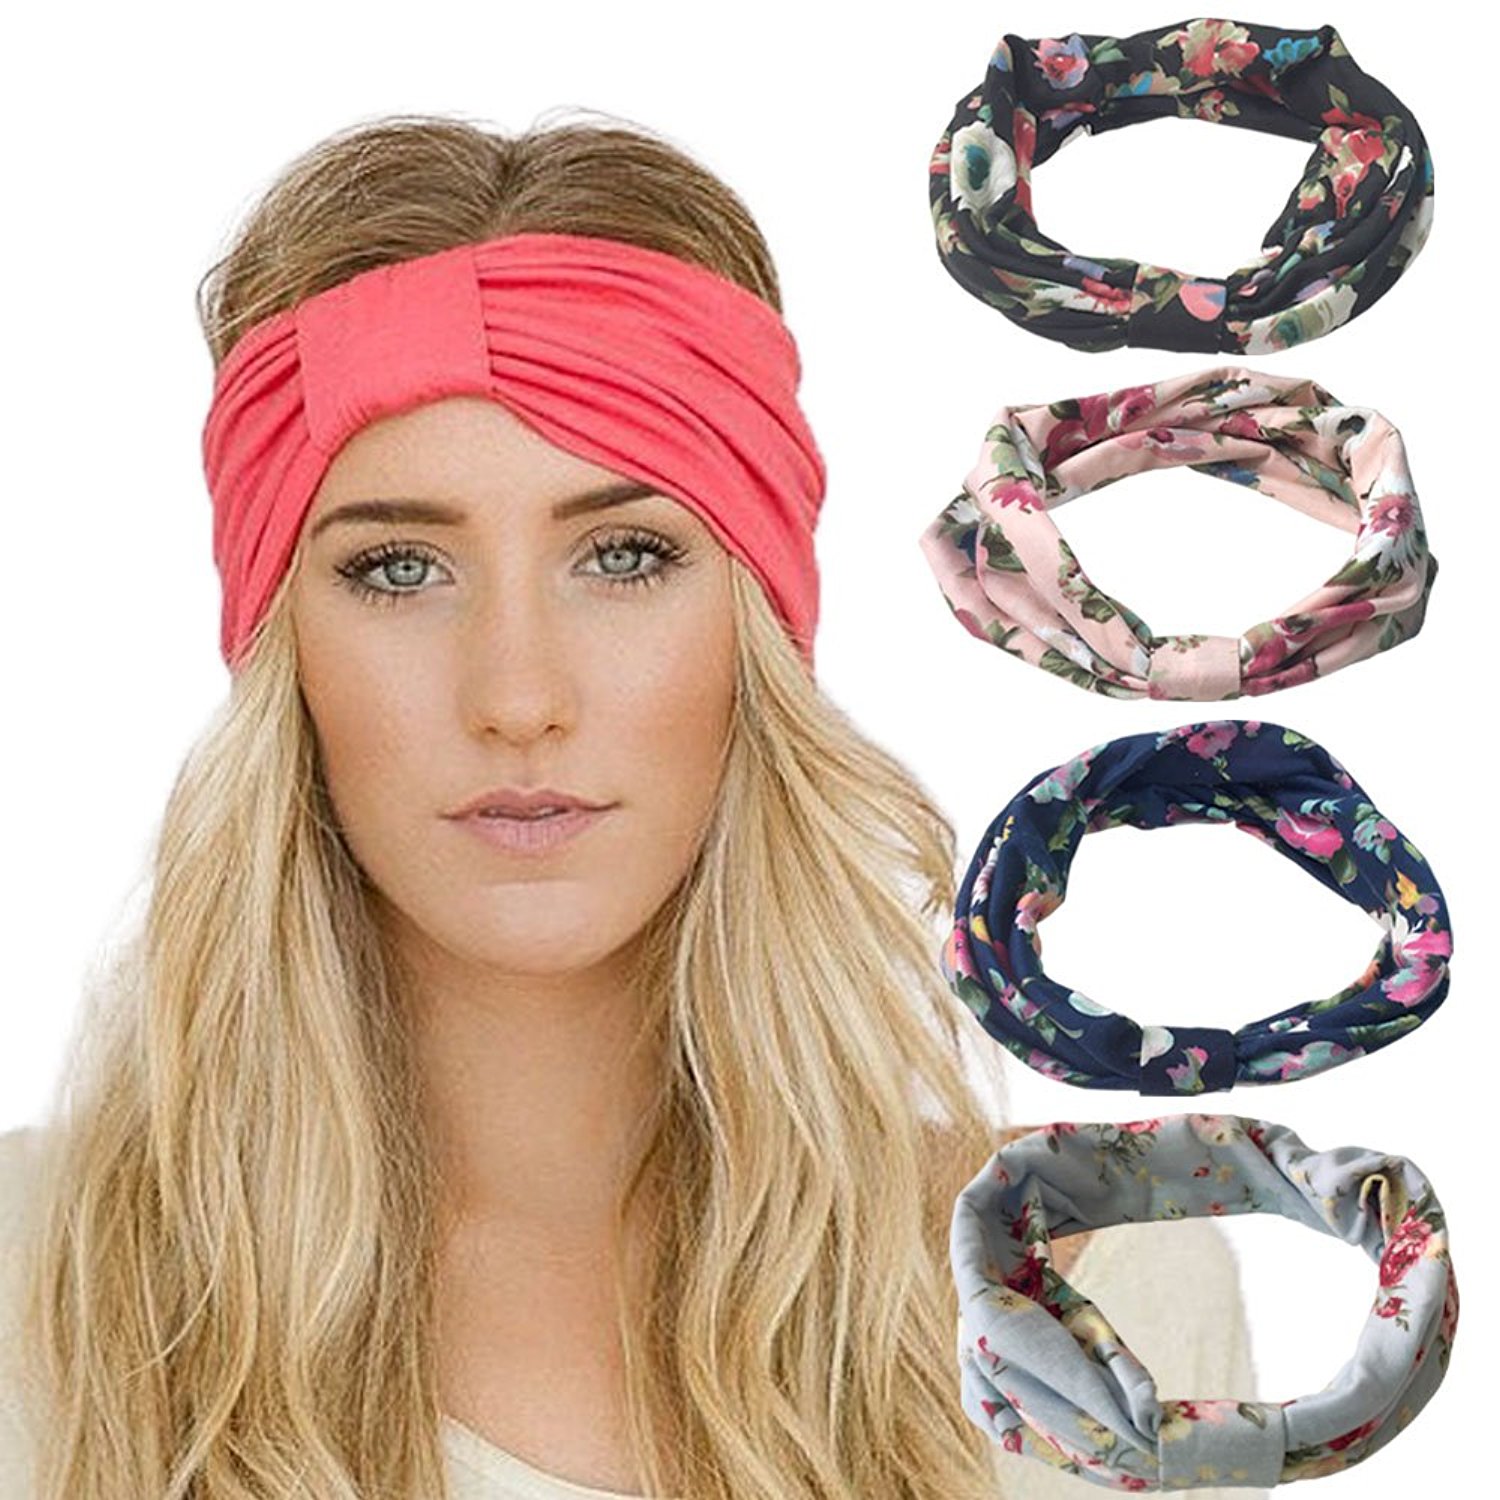 headbands for women 4 pack headbands vintage elastic printed head wrap stretchy moisture solid  color criss YGHPIBS